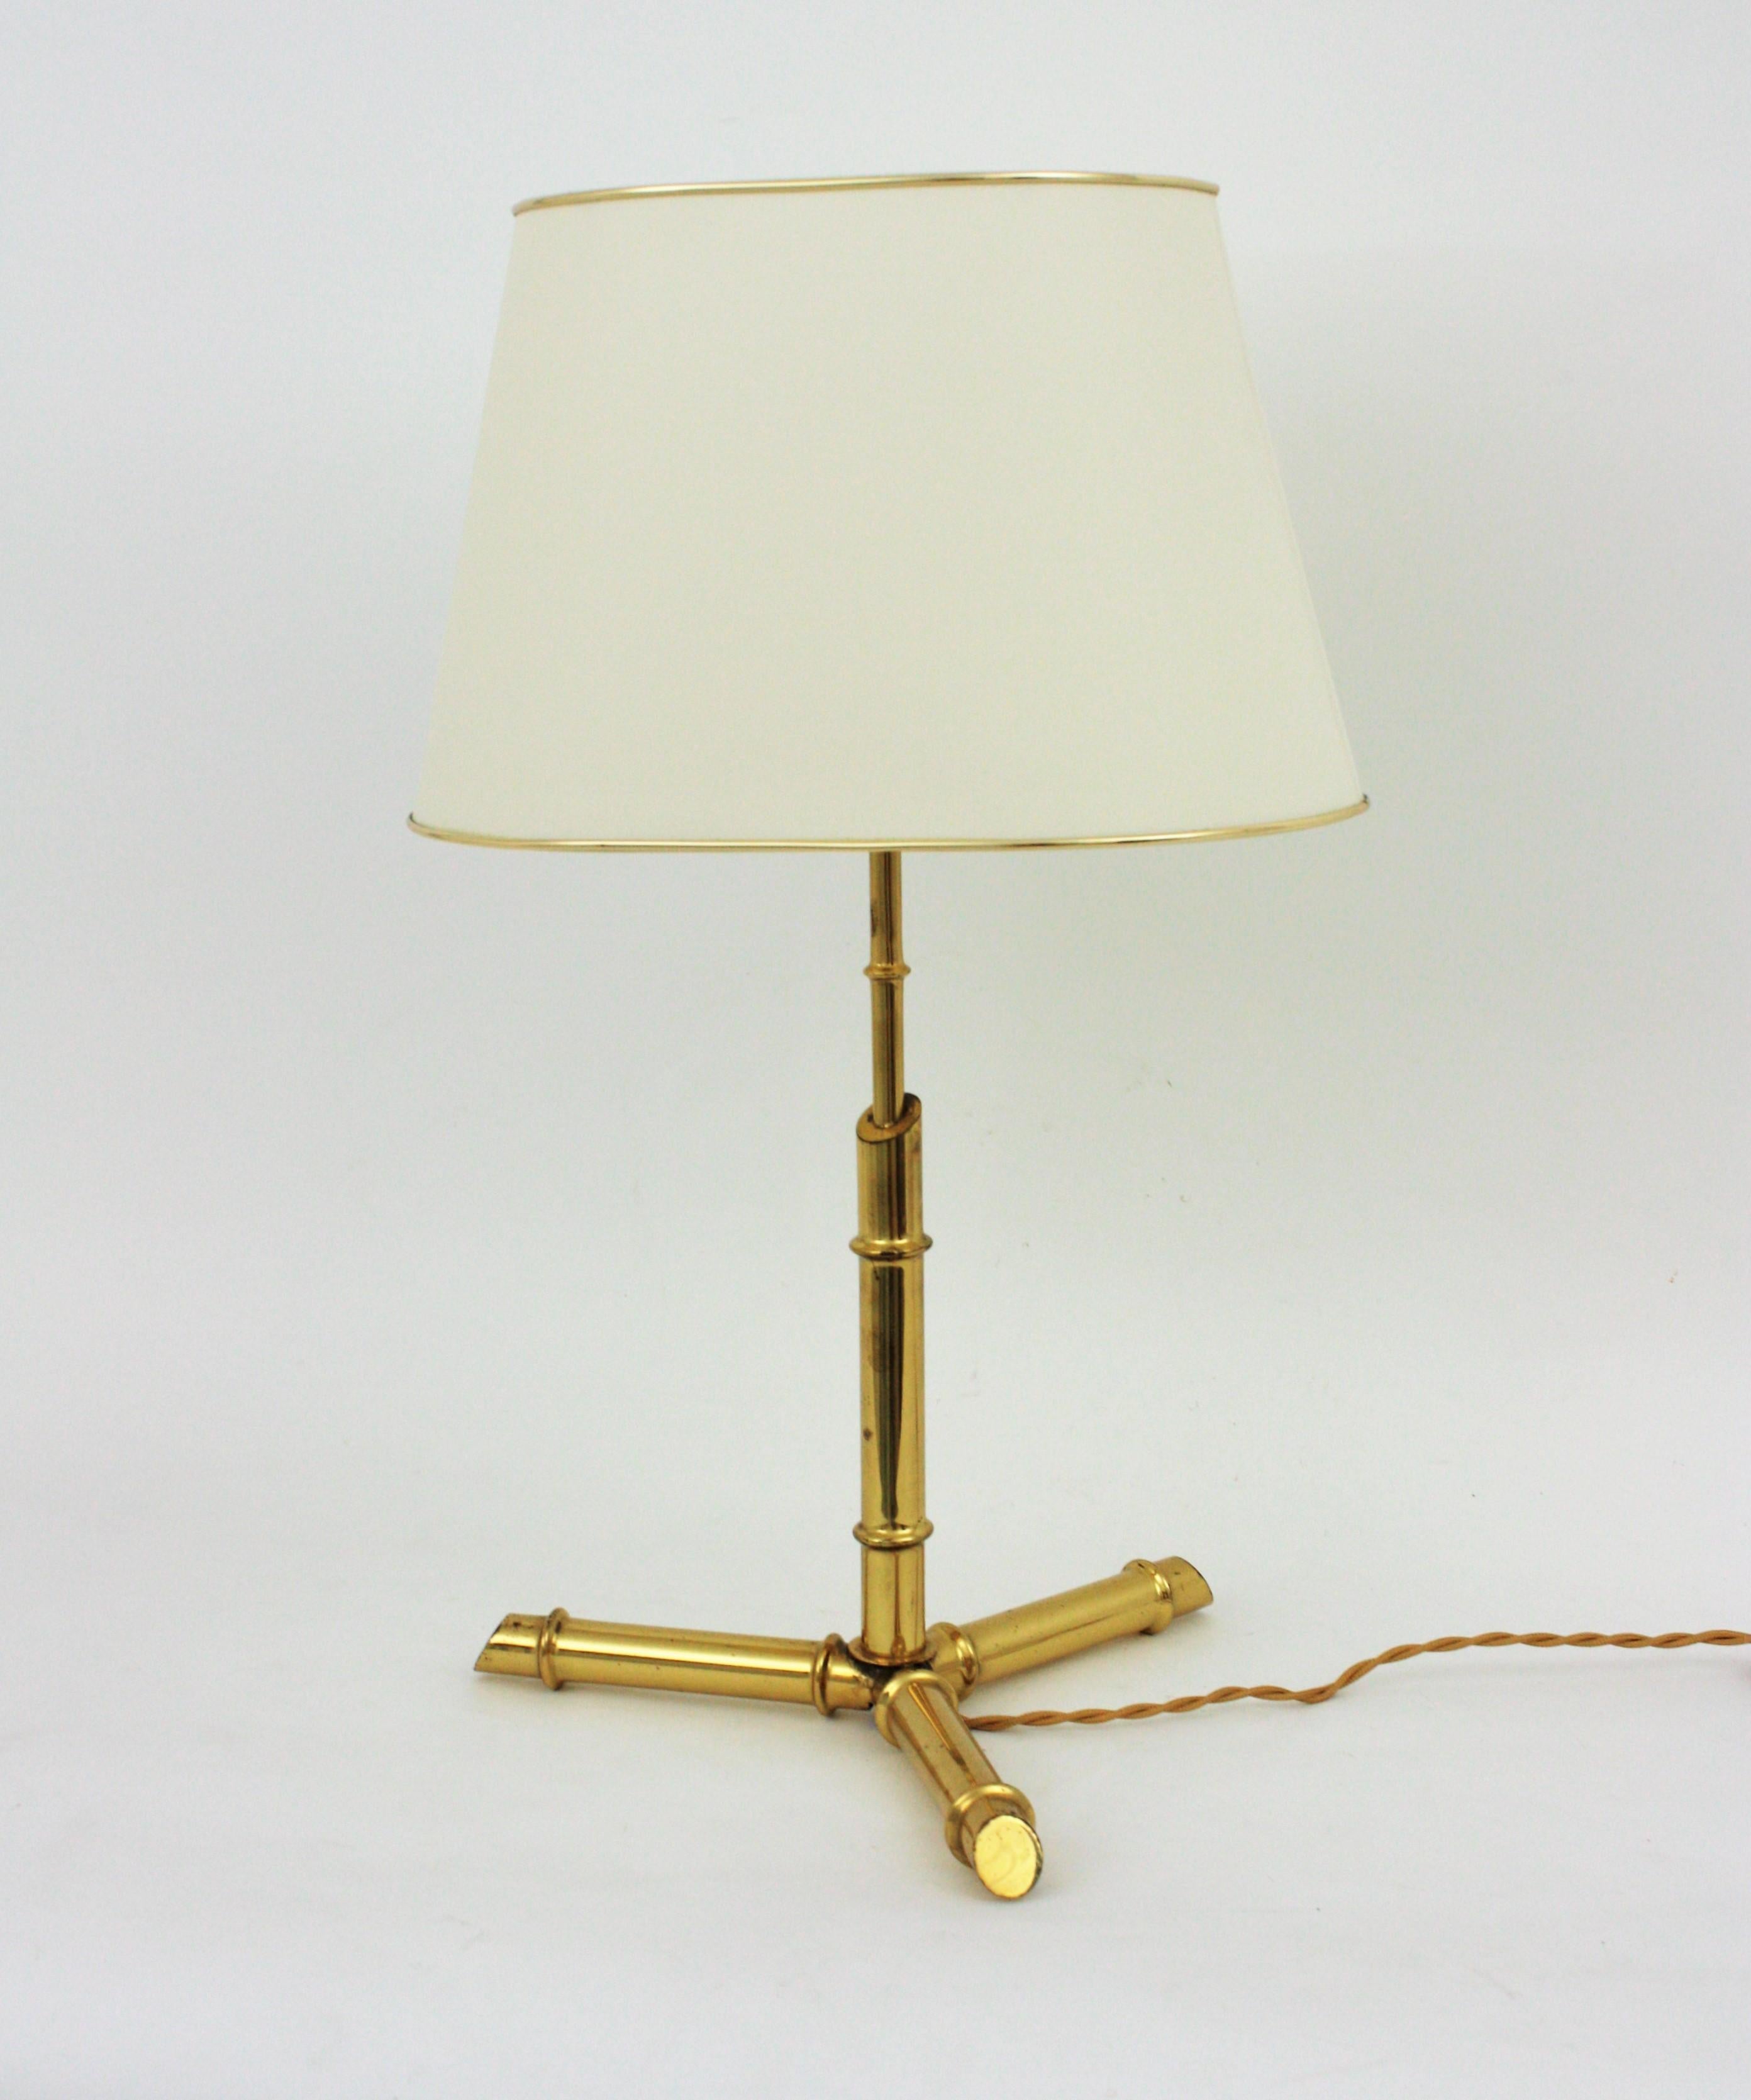 Italian Faux Bamboo Tripod Table Lamp in Brass, 1970s For Sale 6